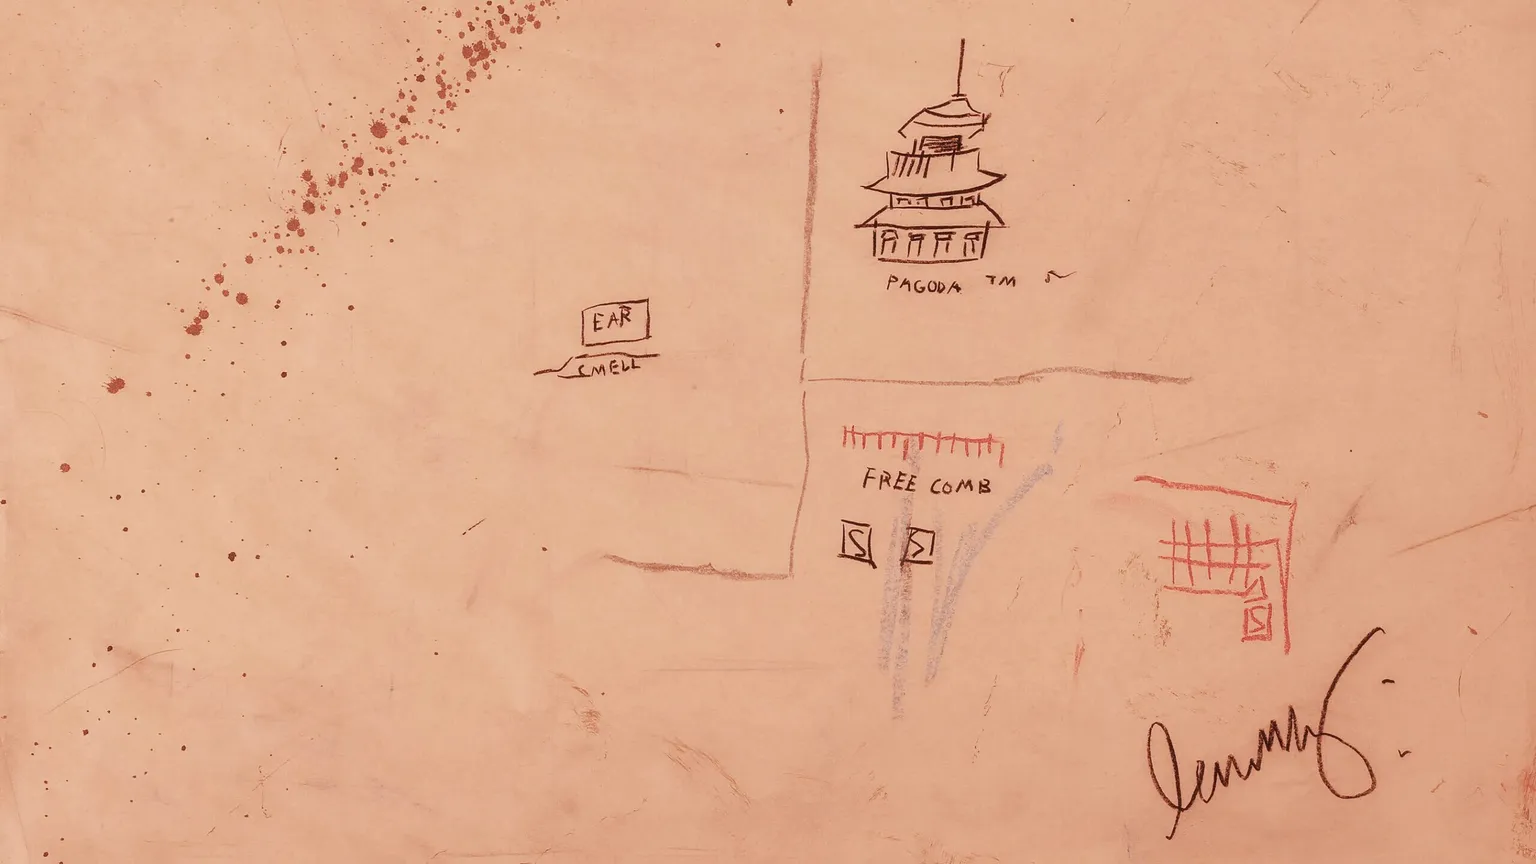 Jean-Michel Basquiat's Free Comb with Pagoda. Image: OpenSea